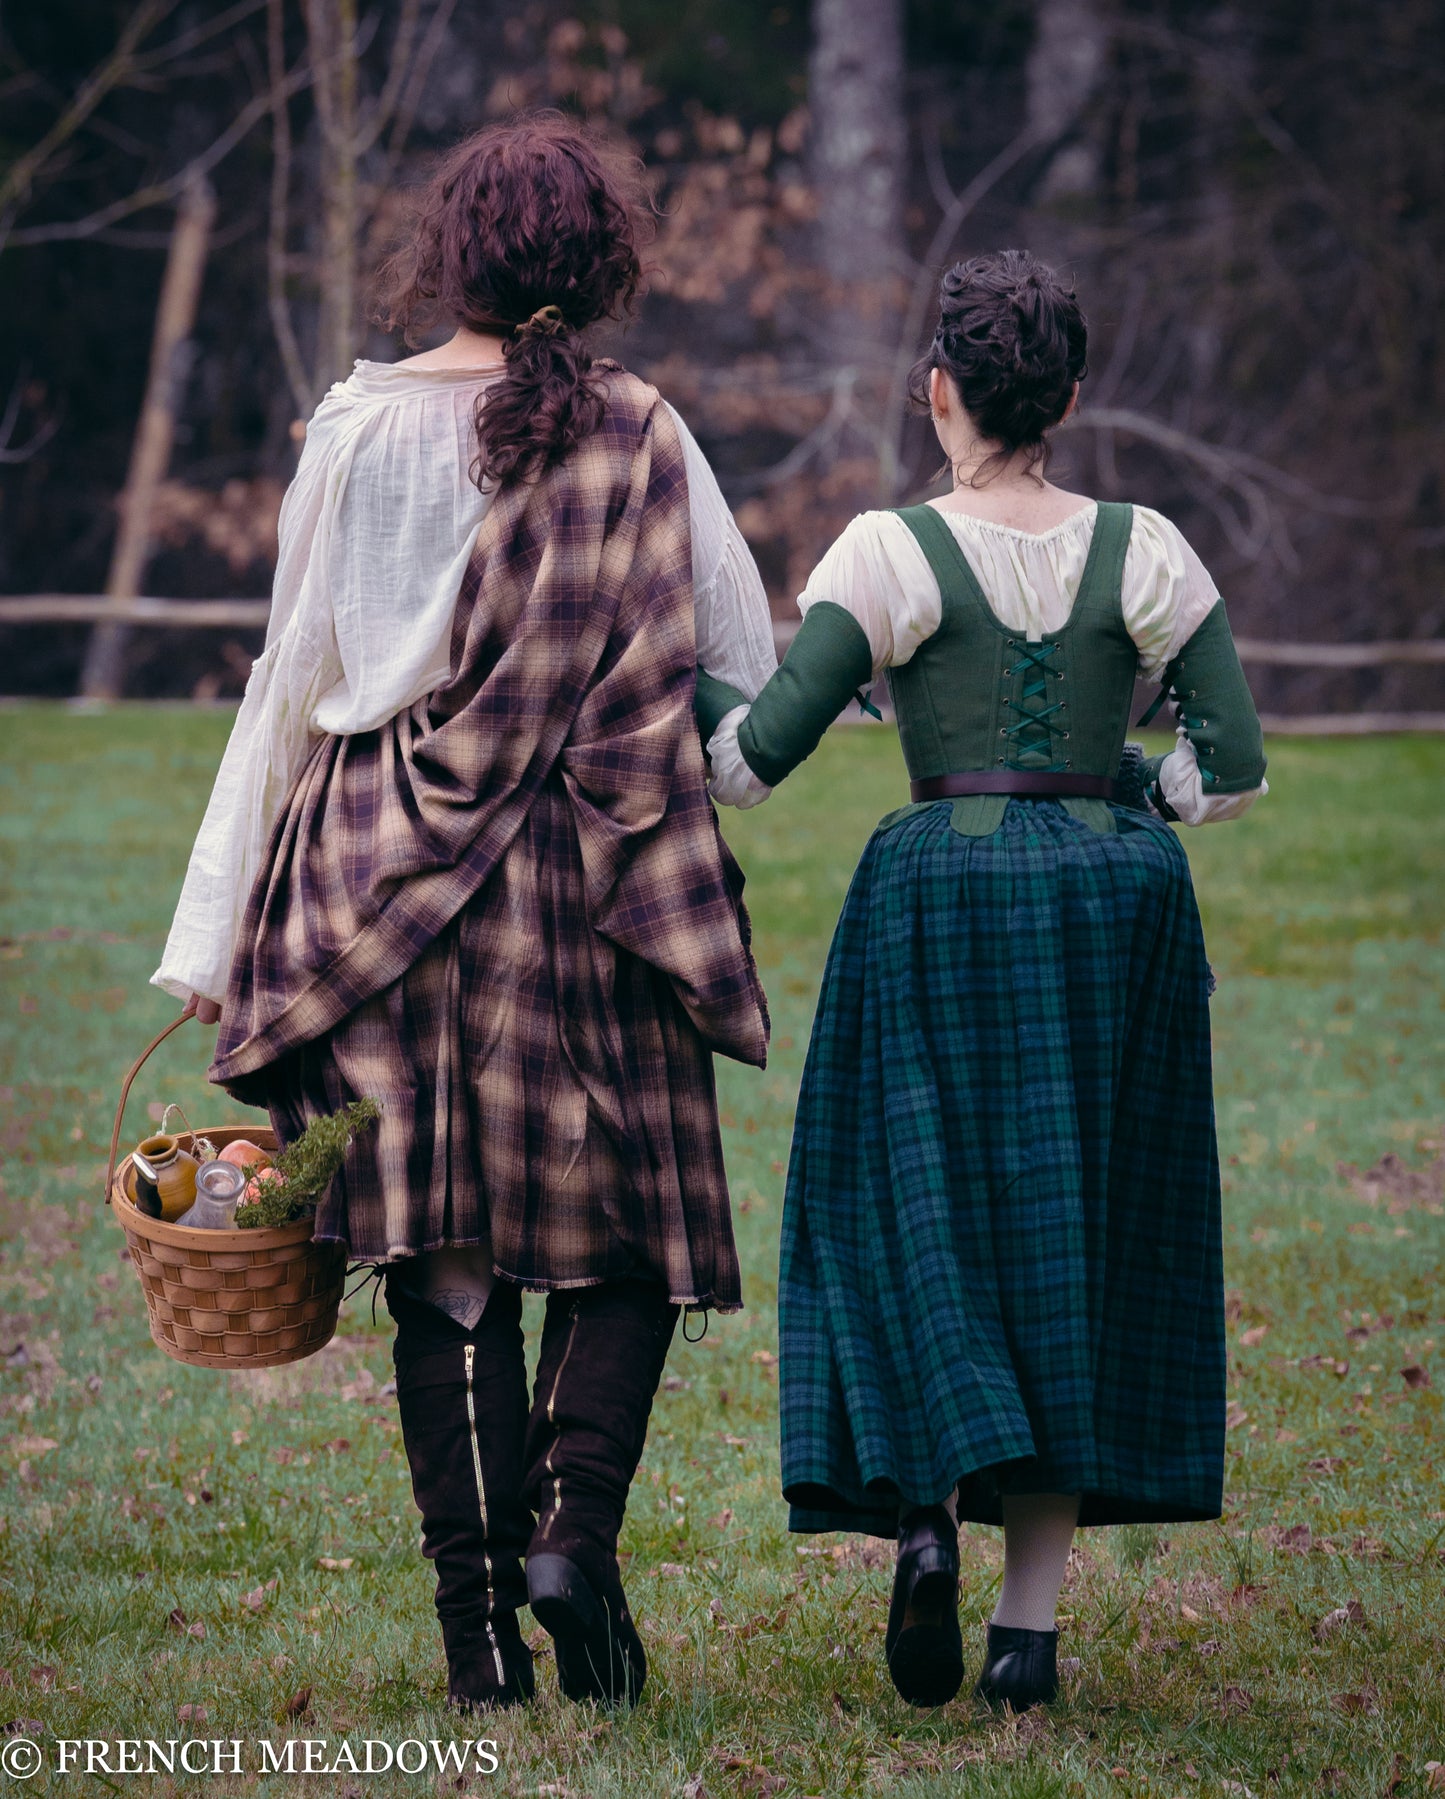 Load image into Gallery viewer, READY TO SHIP Blue and Green Plaid Renaissance Skirt
